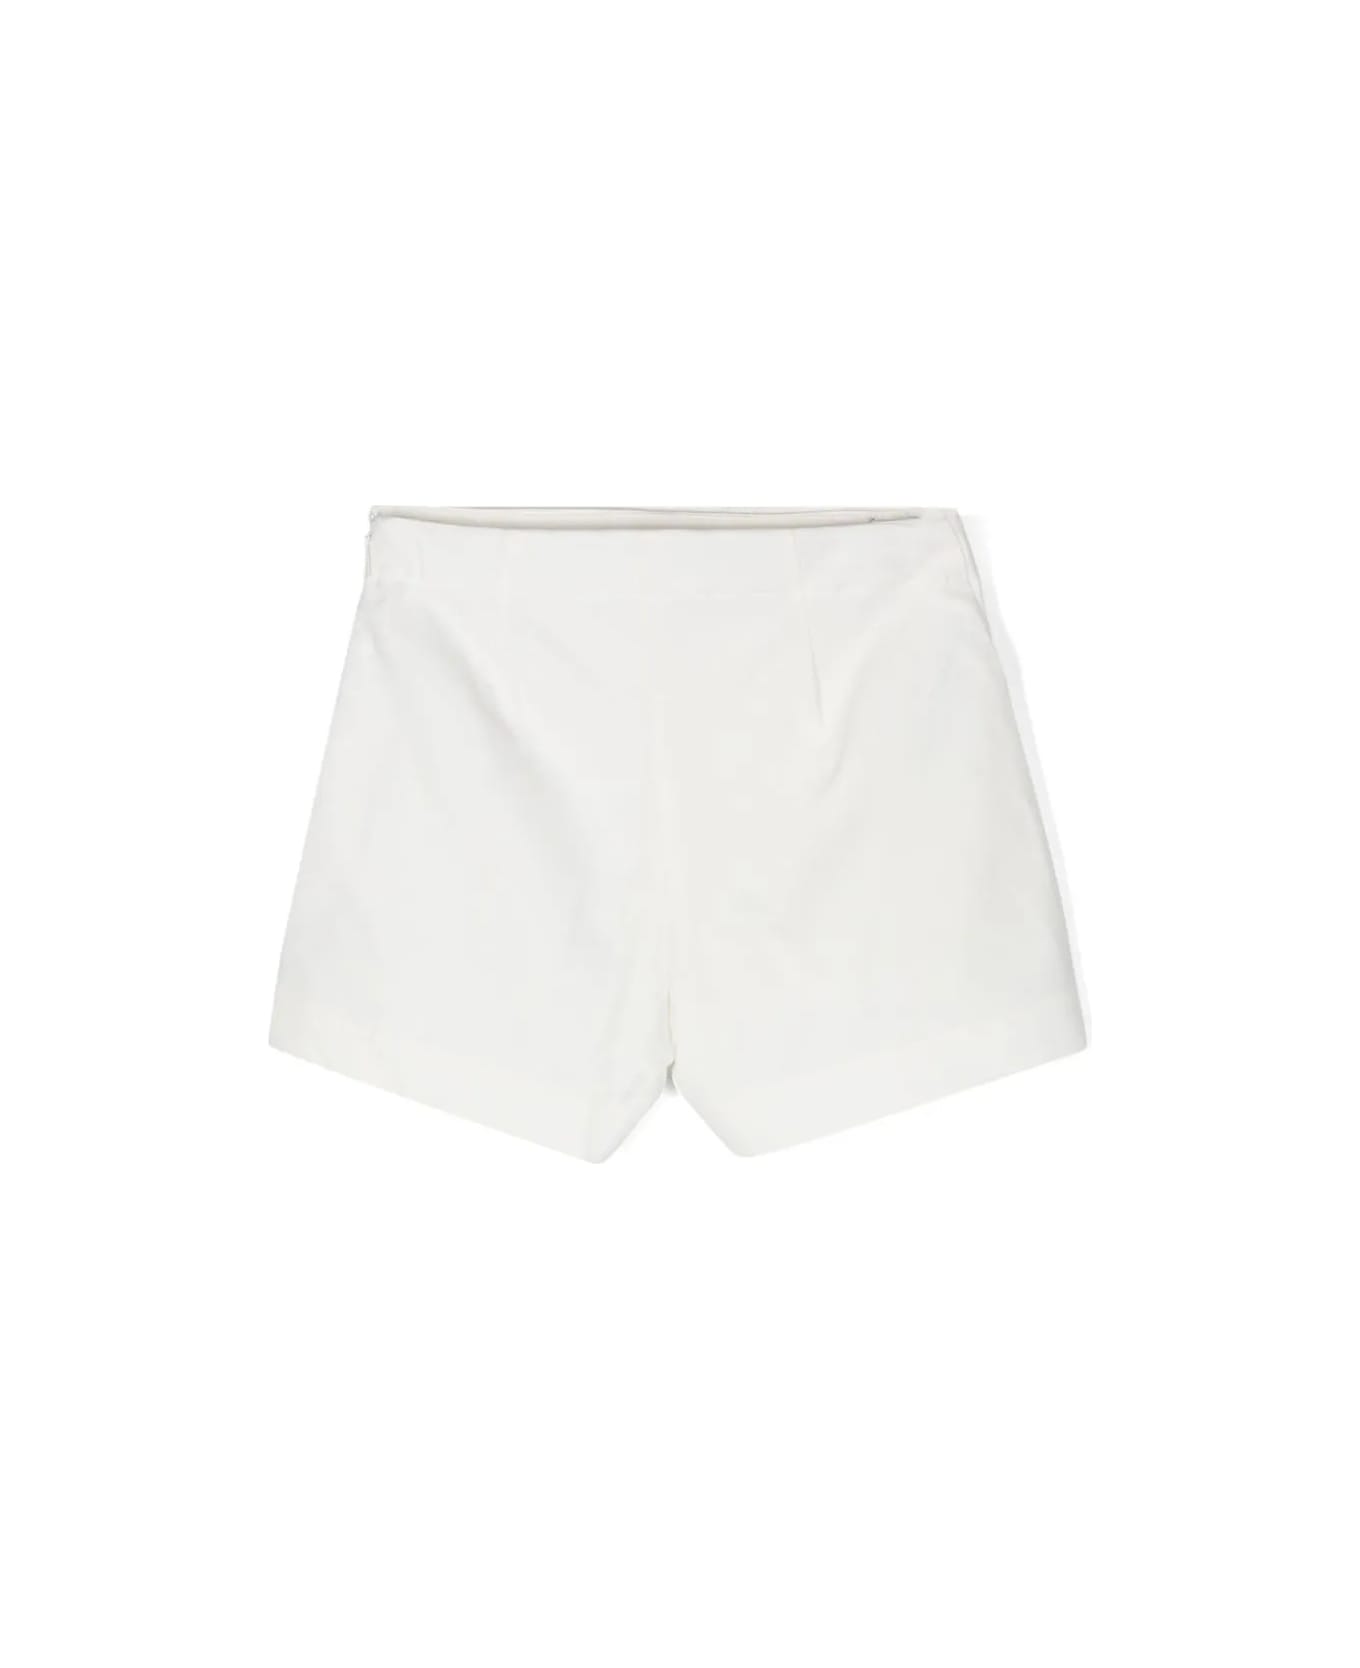 Pucci White Shorts With Printed Insert - White